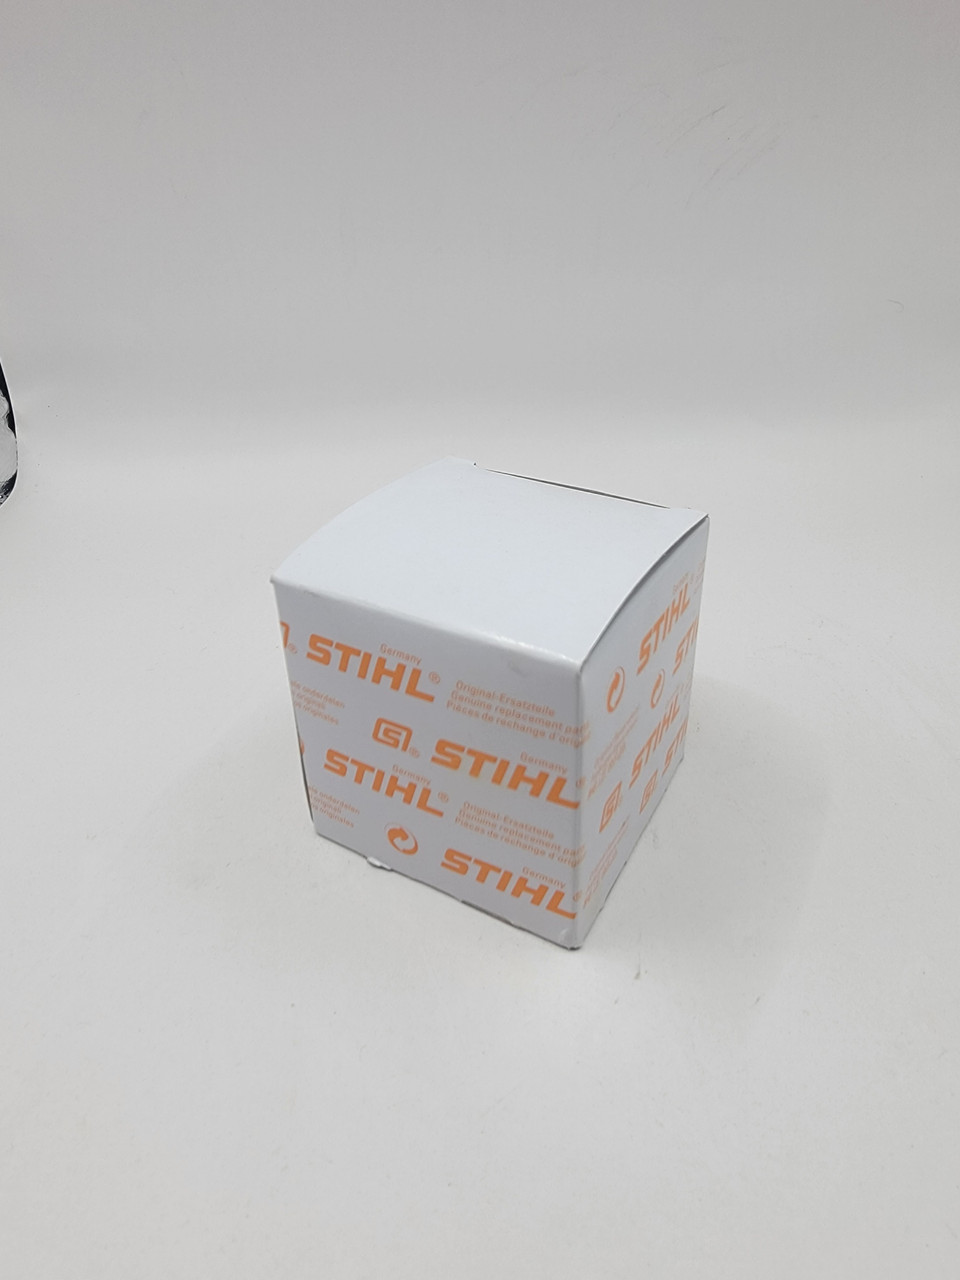 Stihl 4133 642 7601 NUT one package